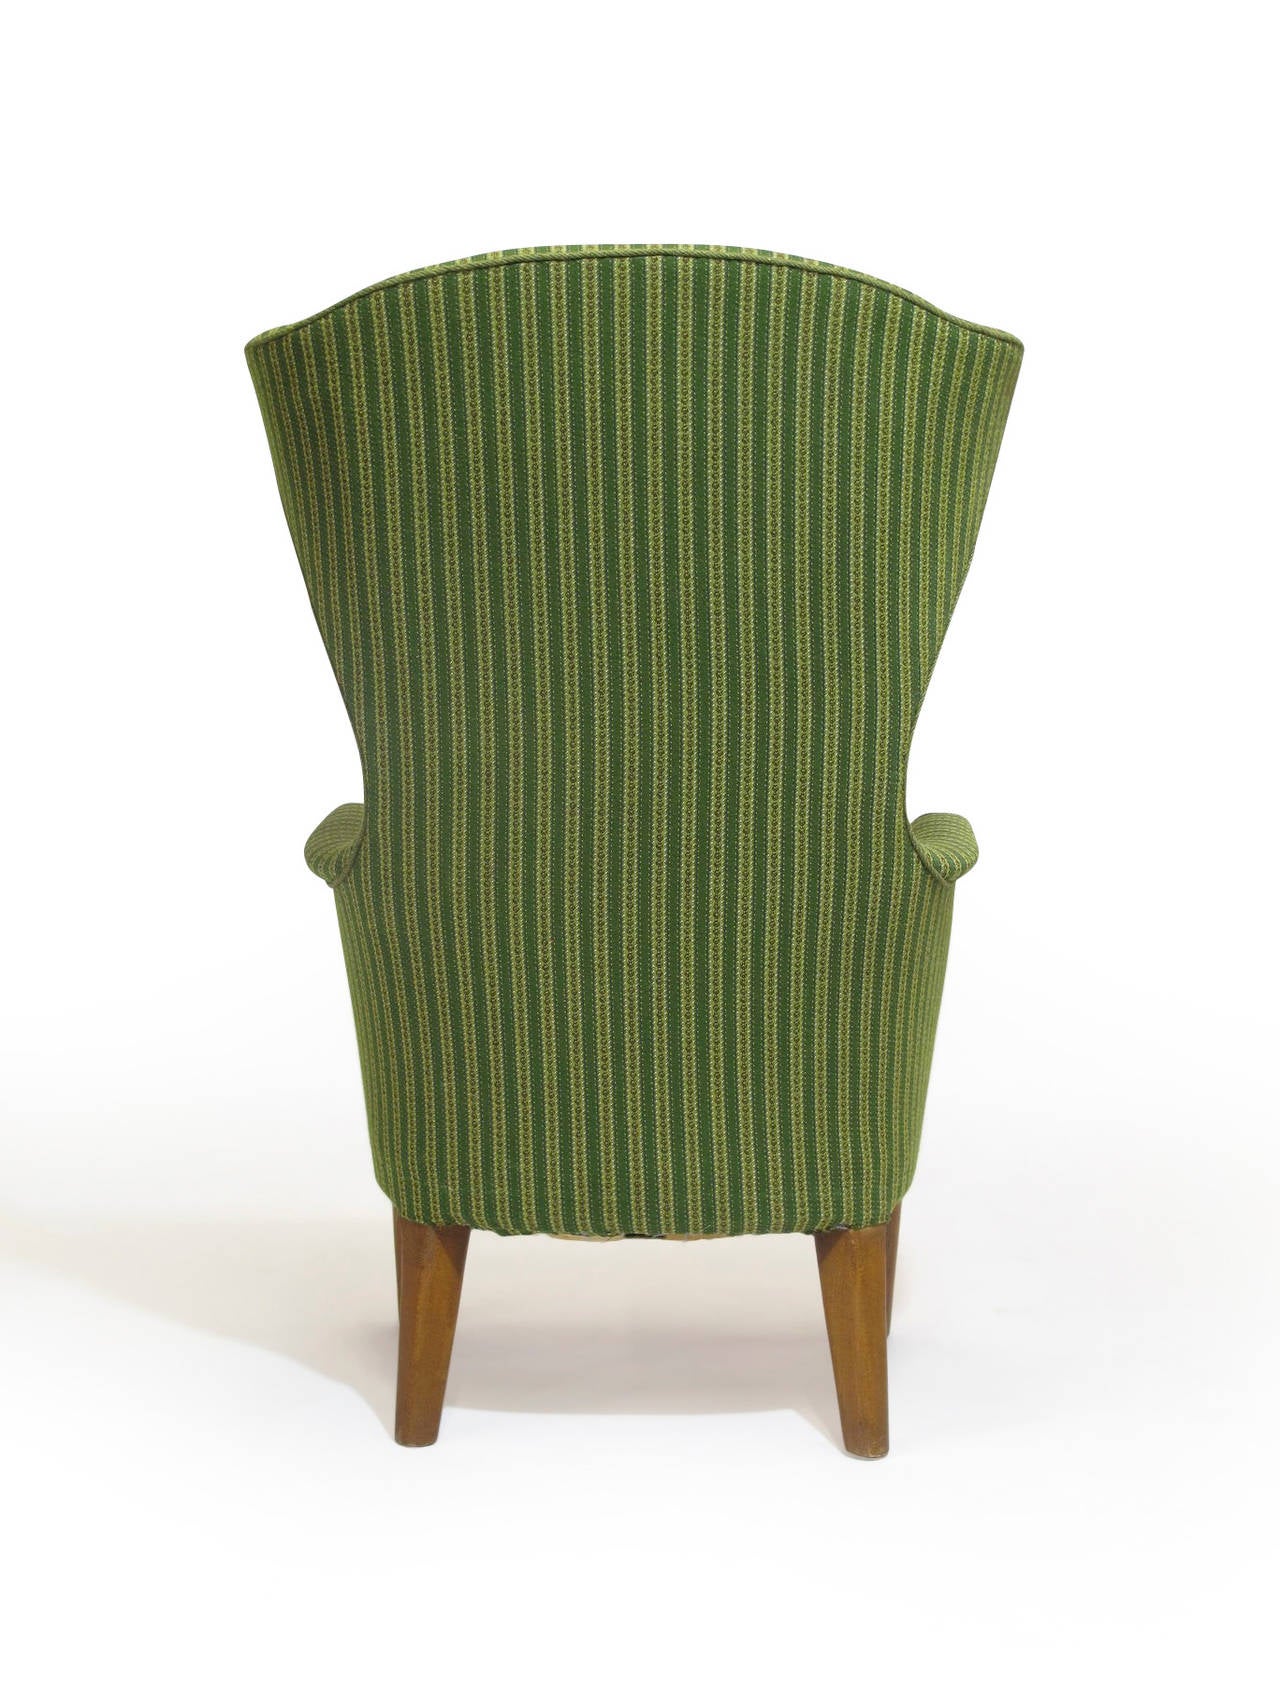 Mid-century Danish wingback chair with dramatic sculptural form. Hand crafted with a solid wood frame, eight-way hand tied springs and horsehair padding. Covered in the original woven green fabric. Raised on oak legs with amber shellac finish.